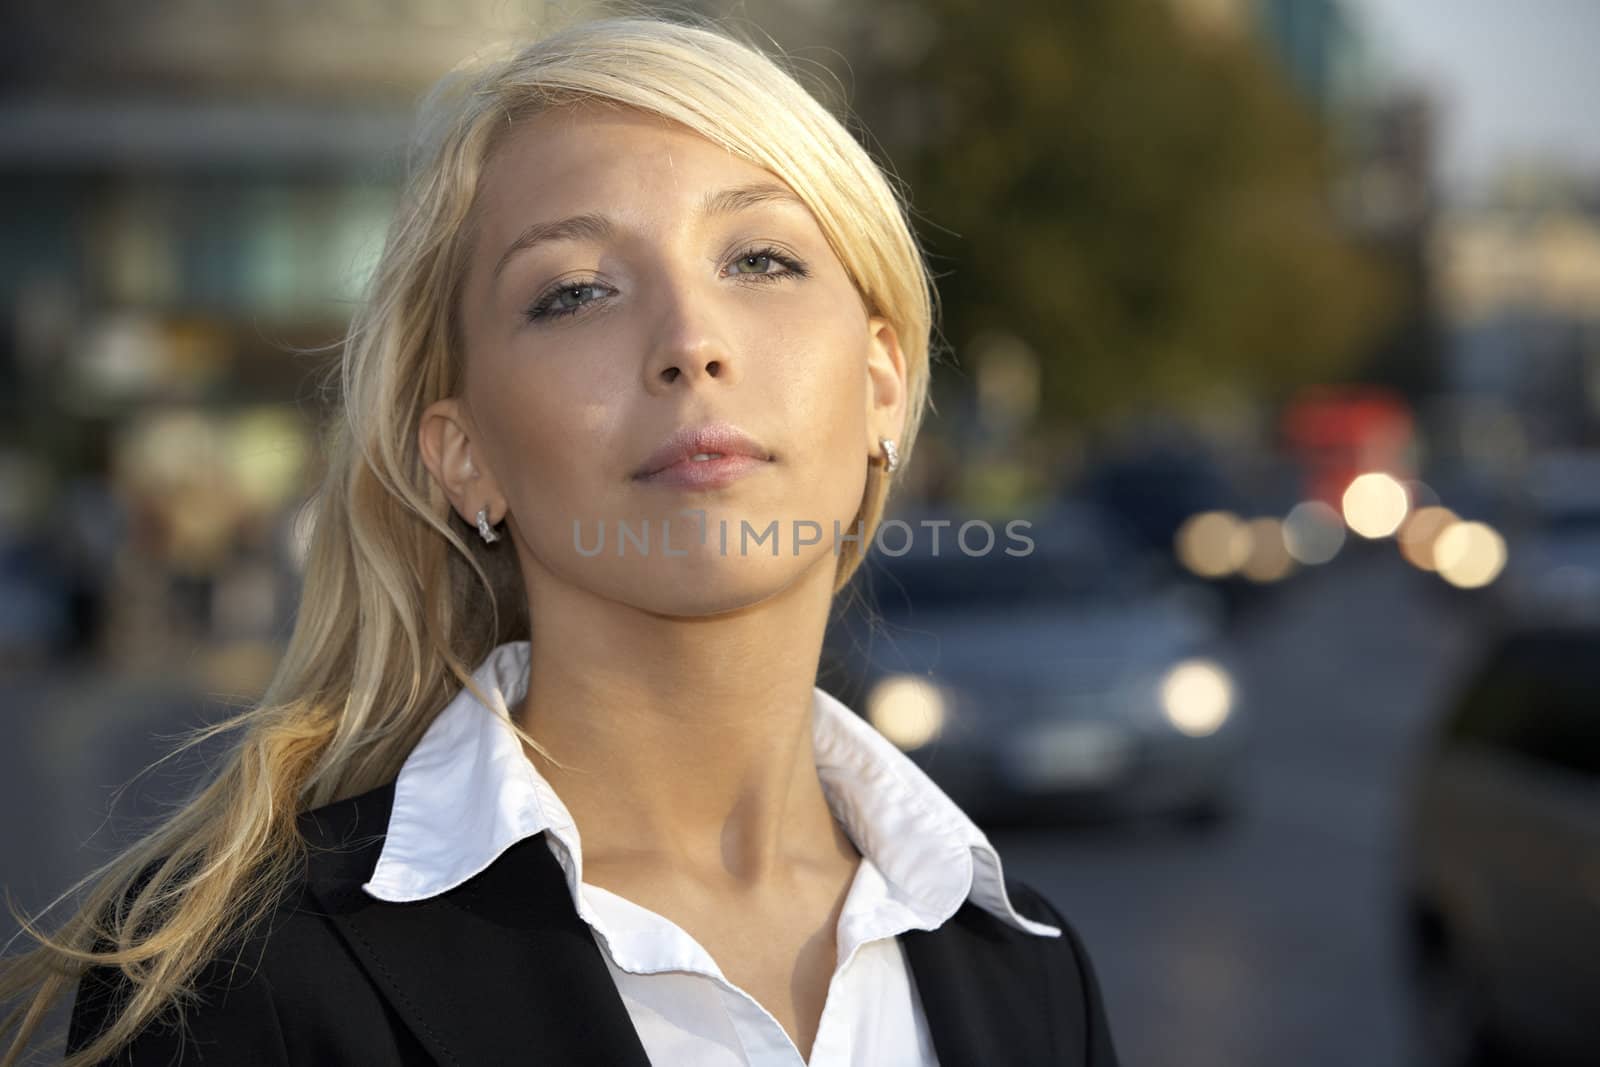 Portrait of young businesswoman in street at night